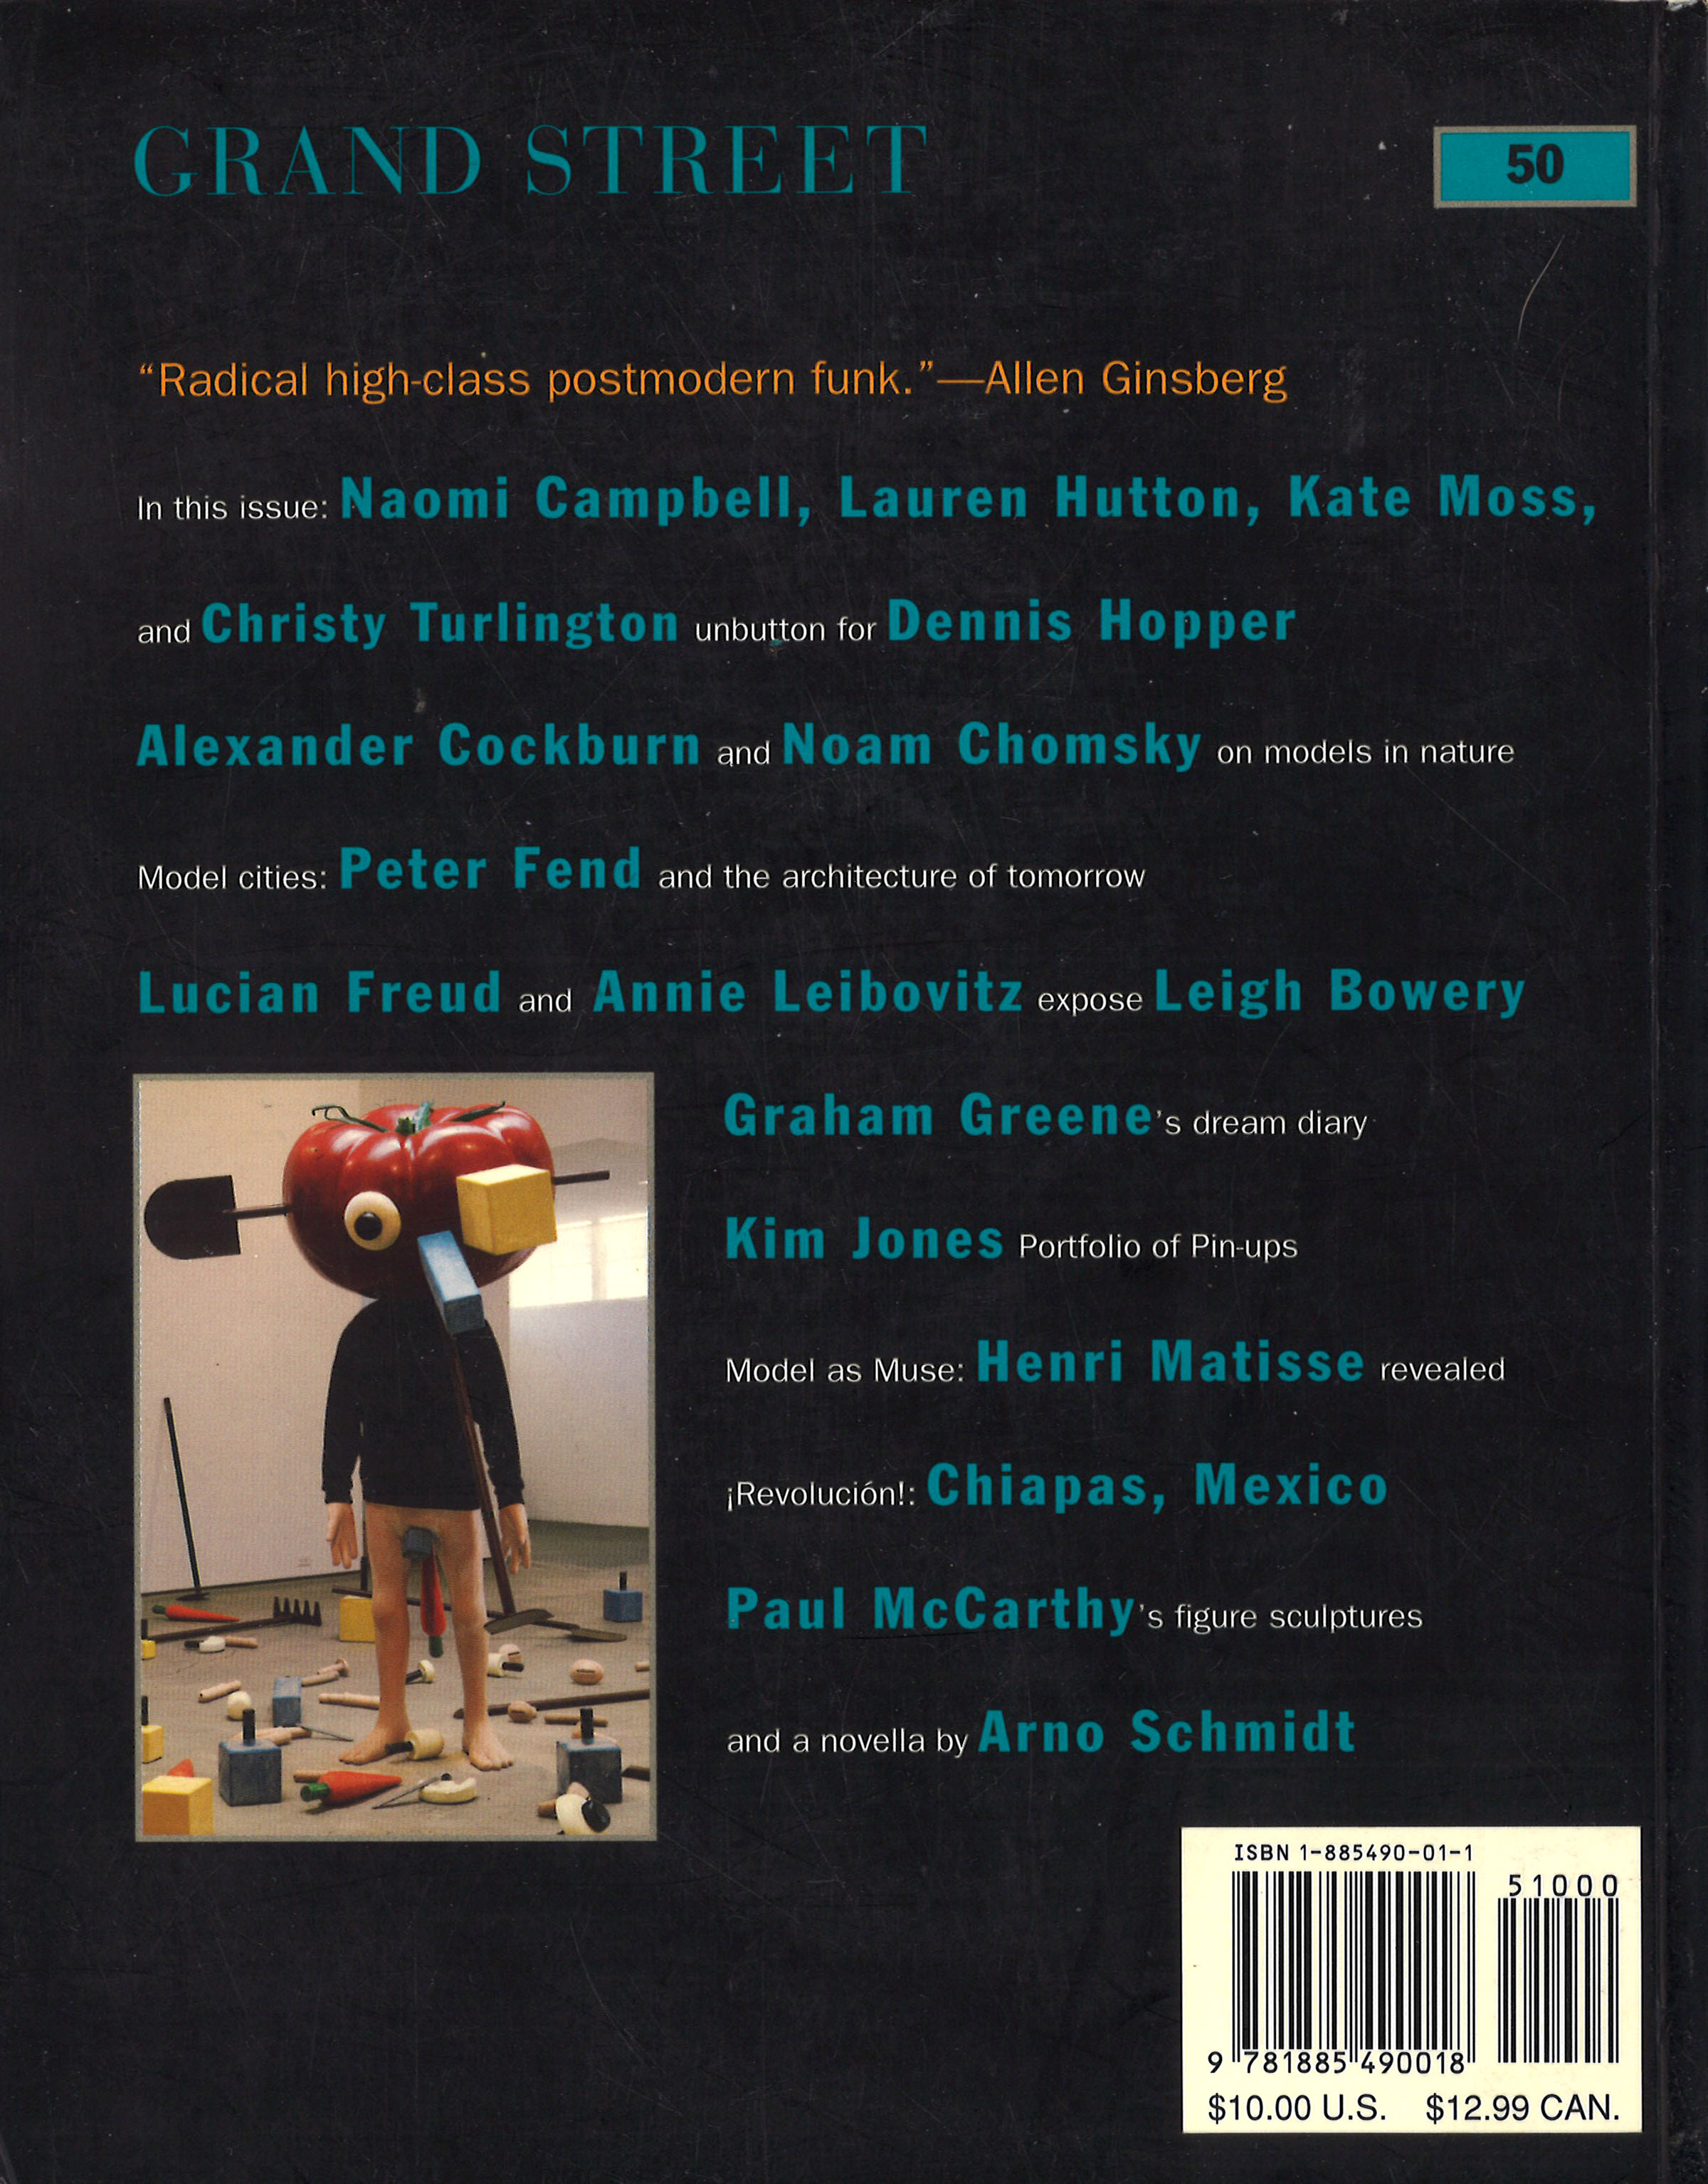 Back cover of the Hollywood issue of <em>Grand Street</em> no. 49 (Summer 1994)